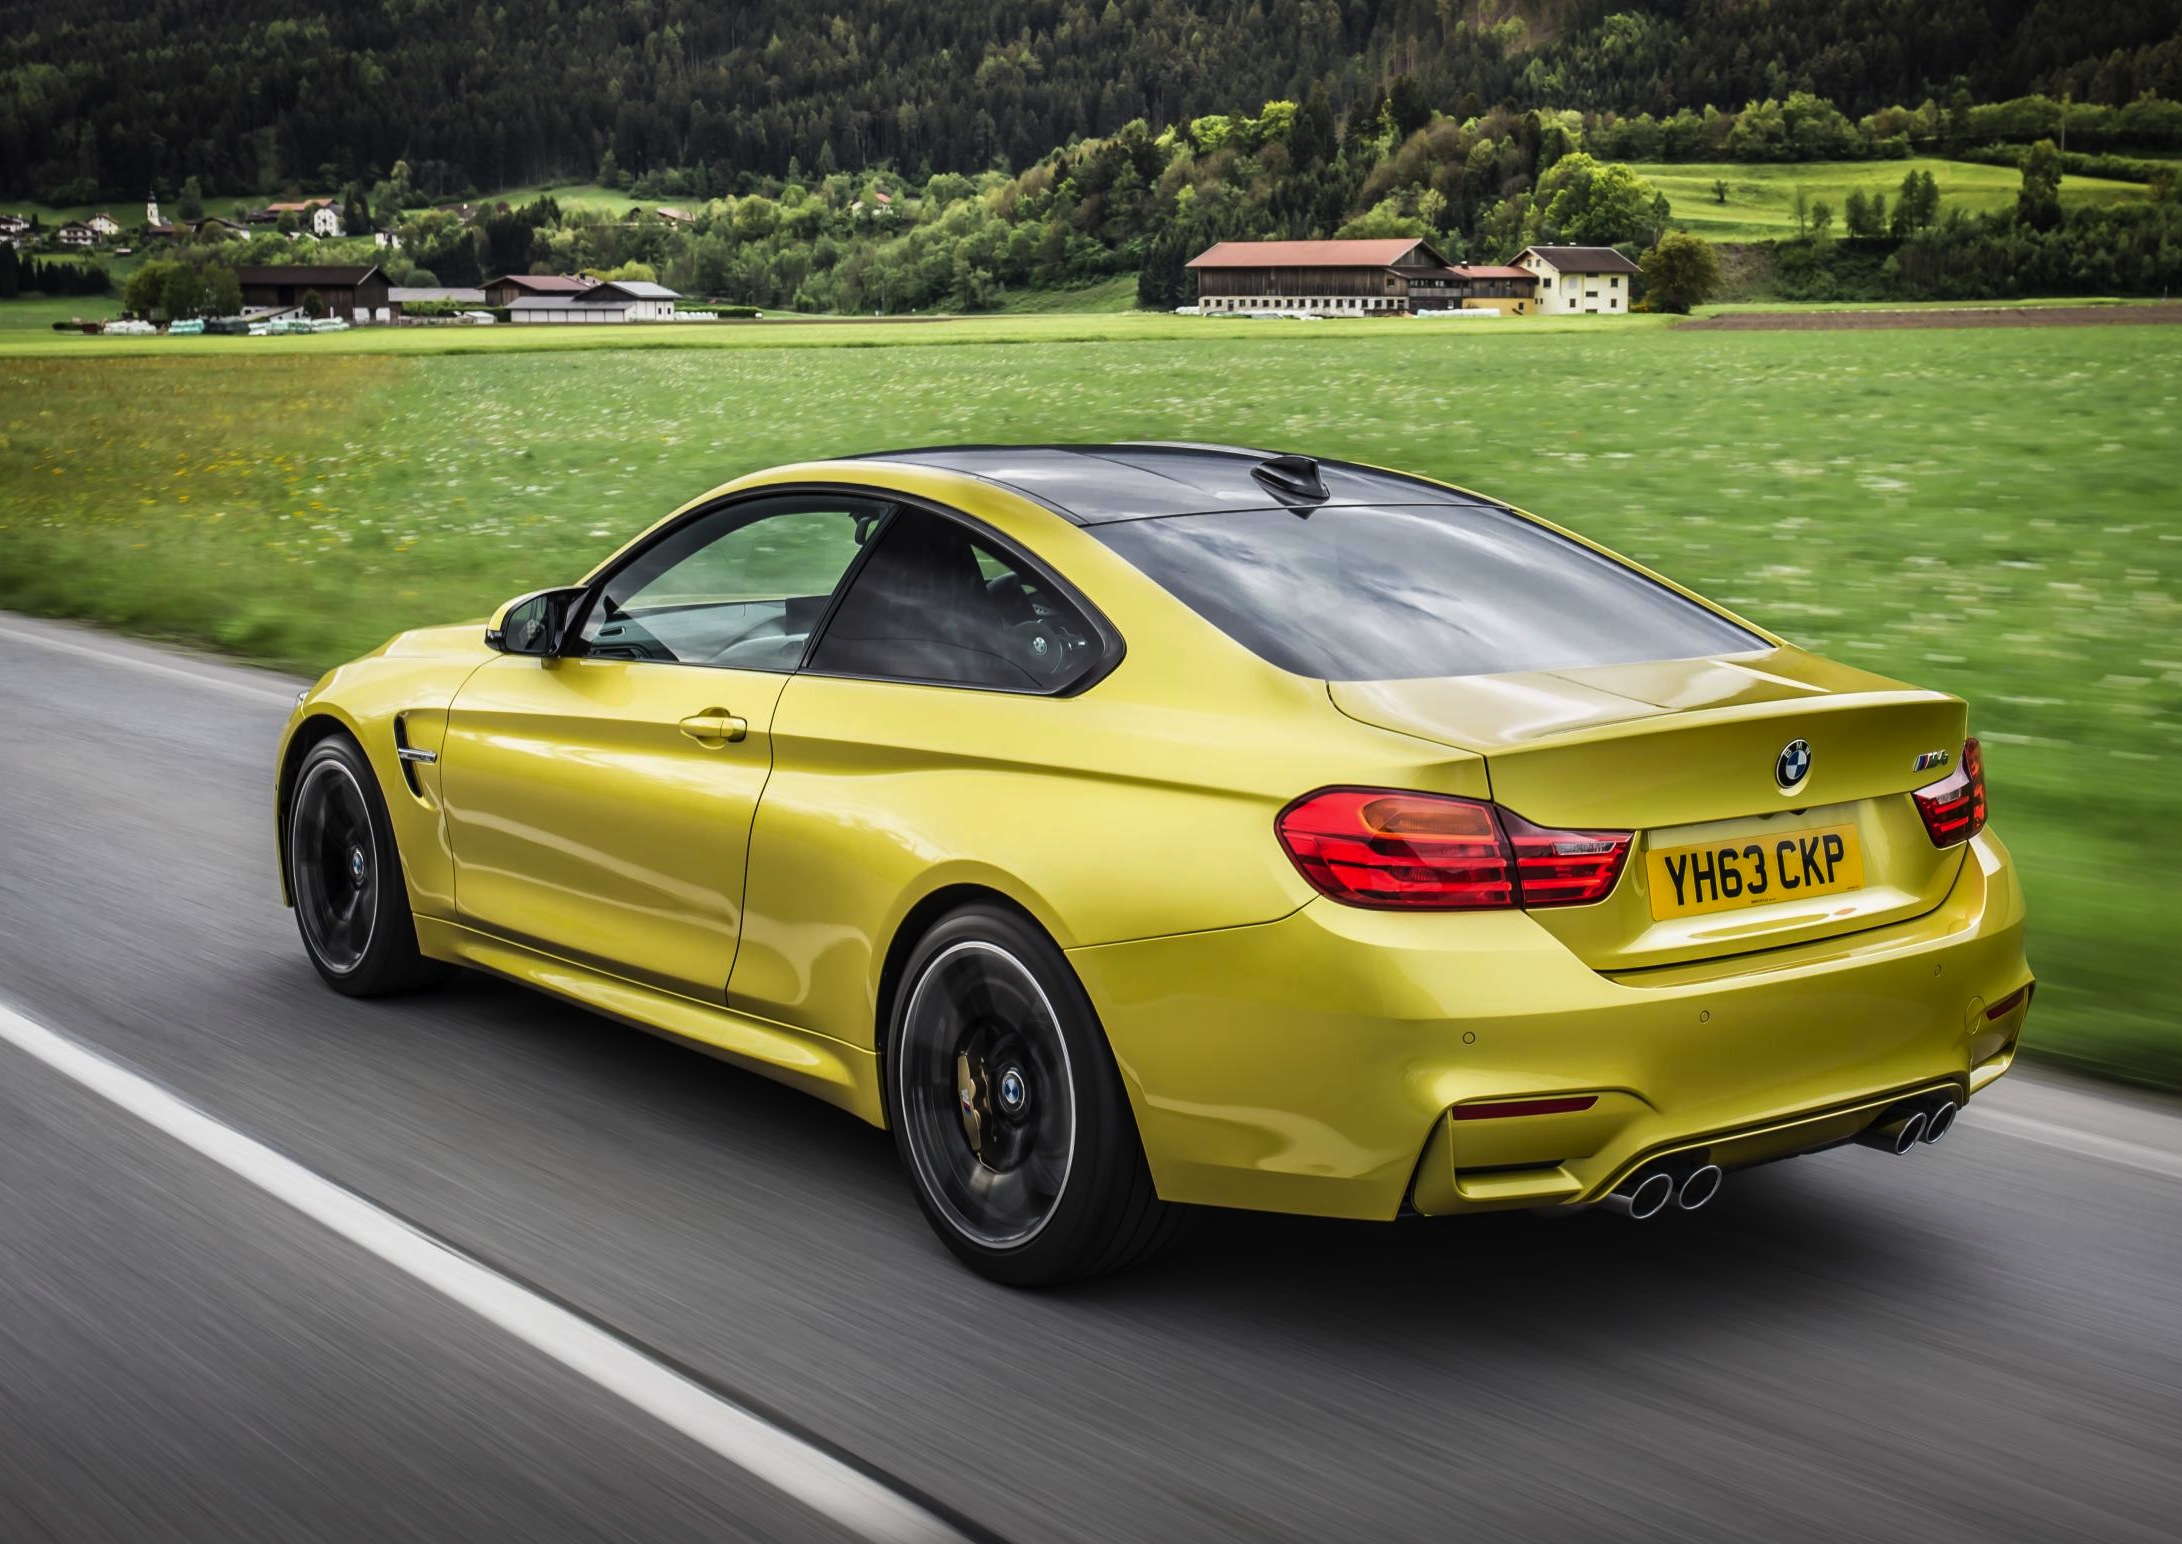 BMW M4 ‘Individual’ debuting at Goodwood, driven by Tiff Needell